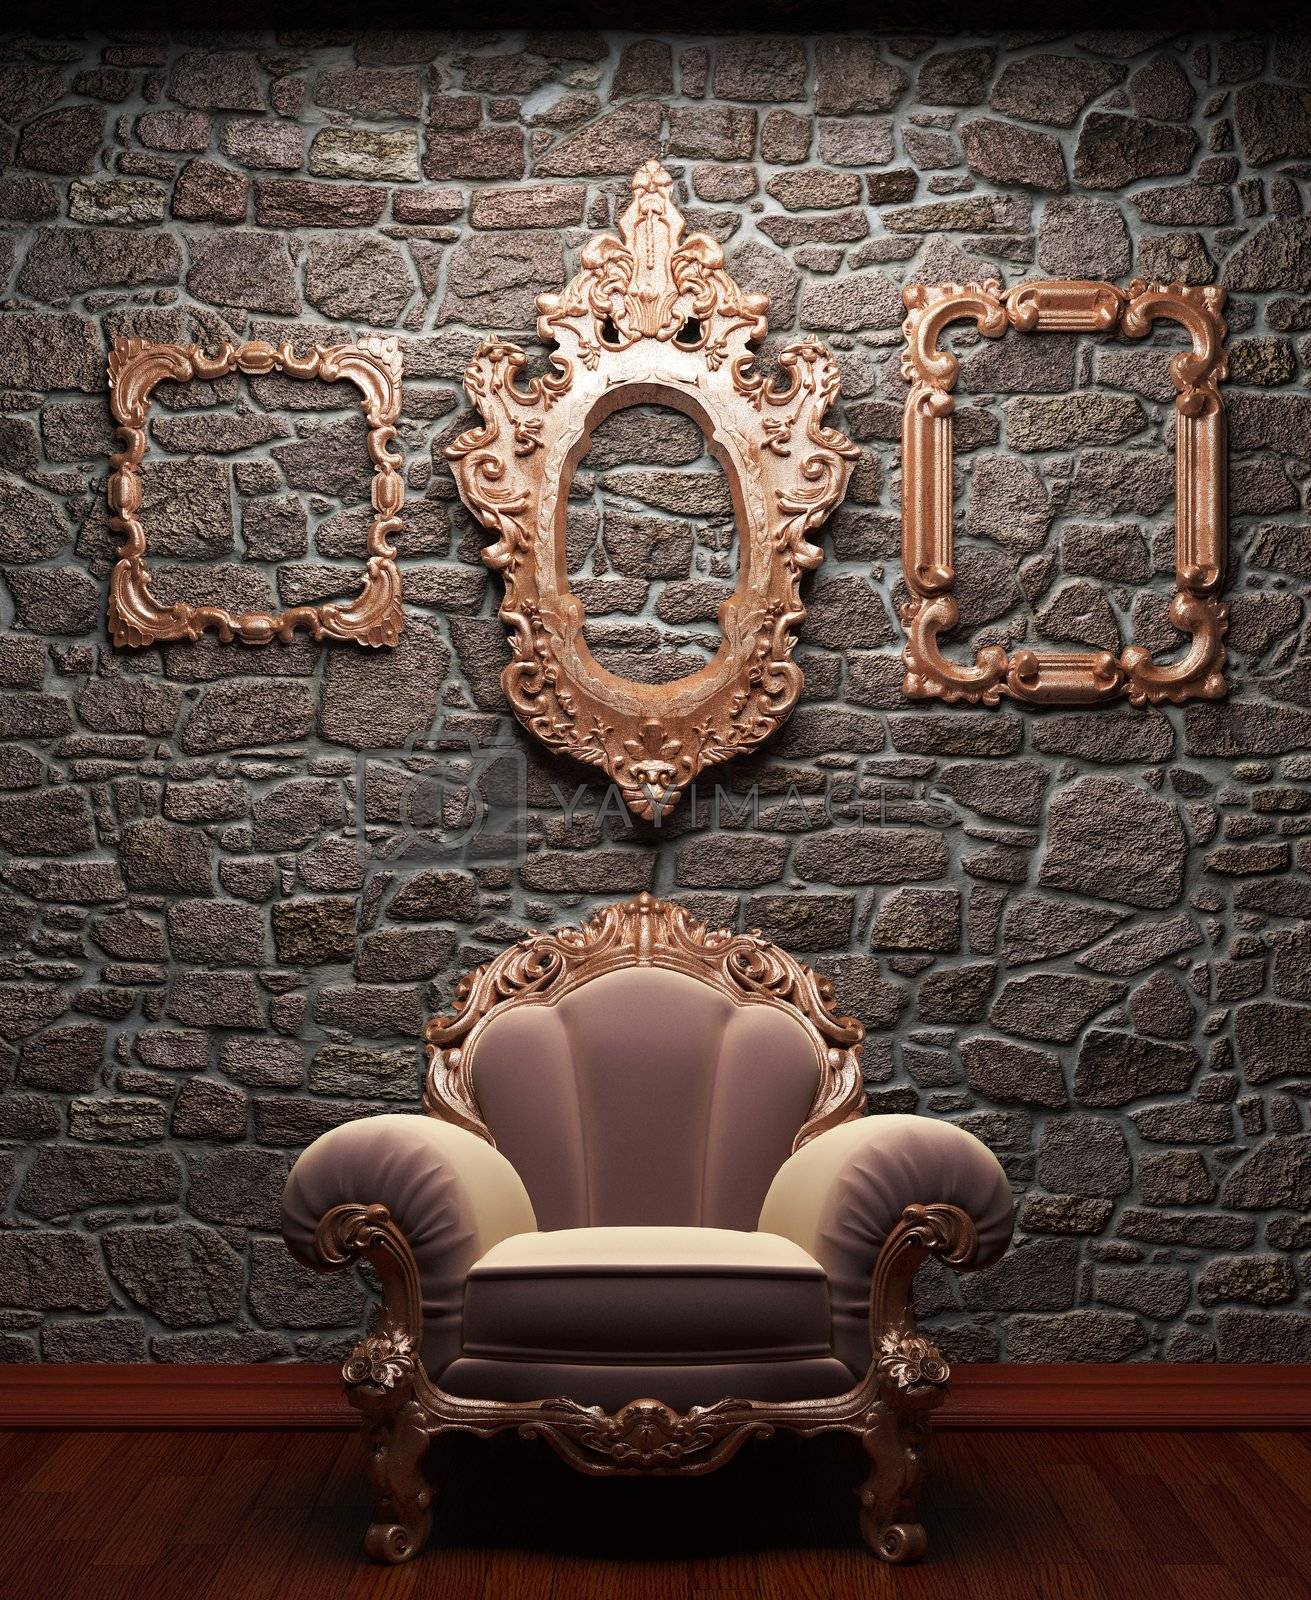 Royalty free image of illuminated stone wall and chair by icetray